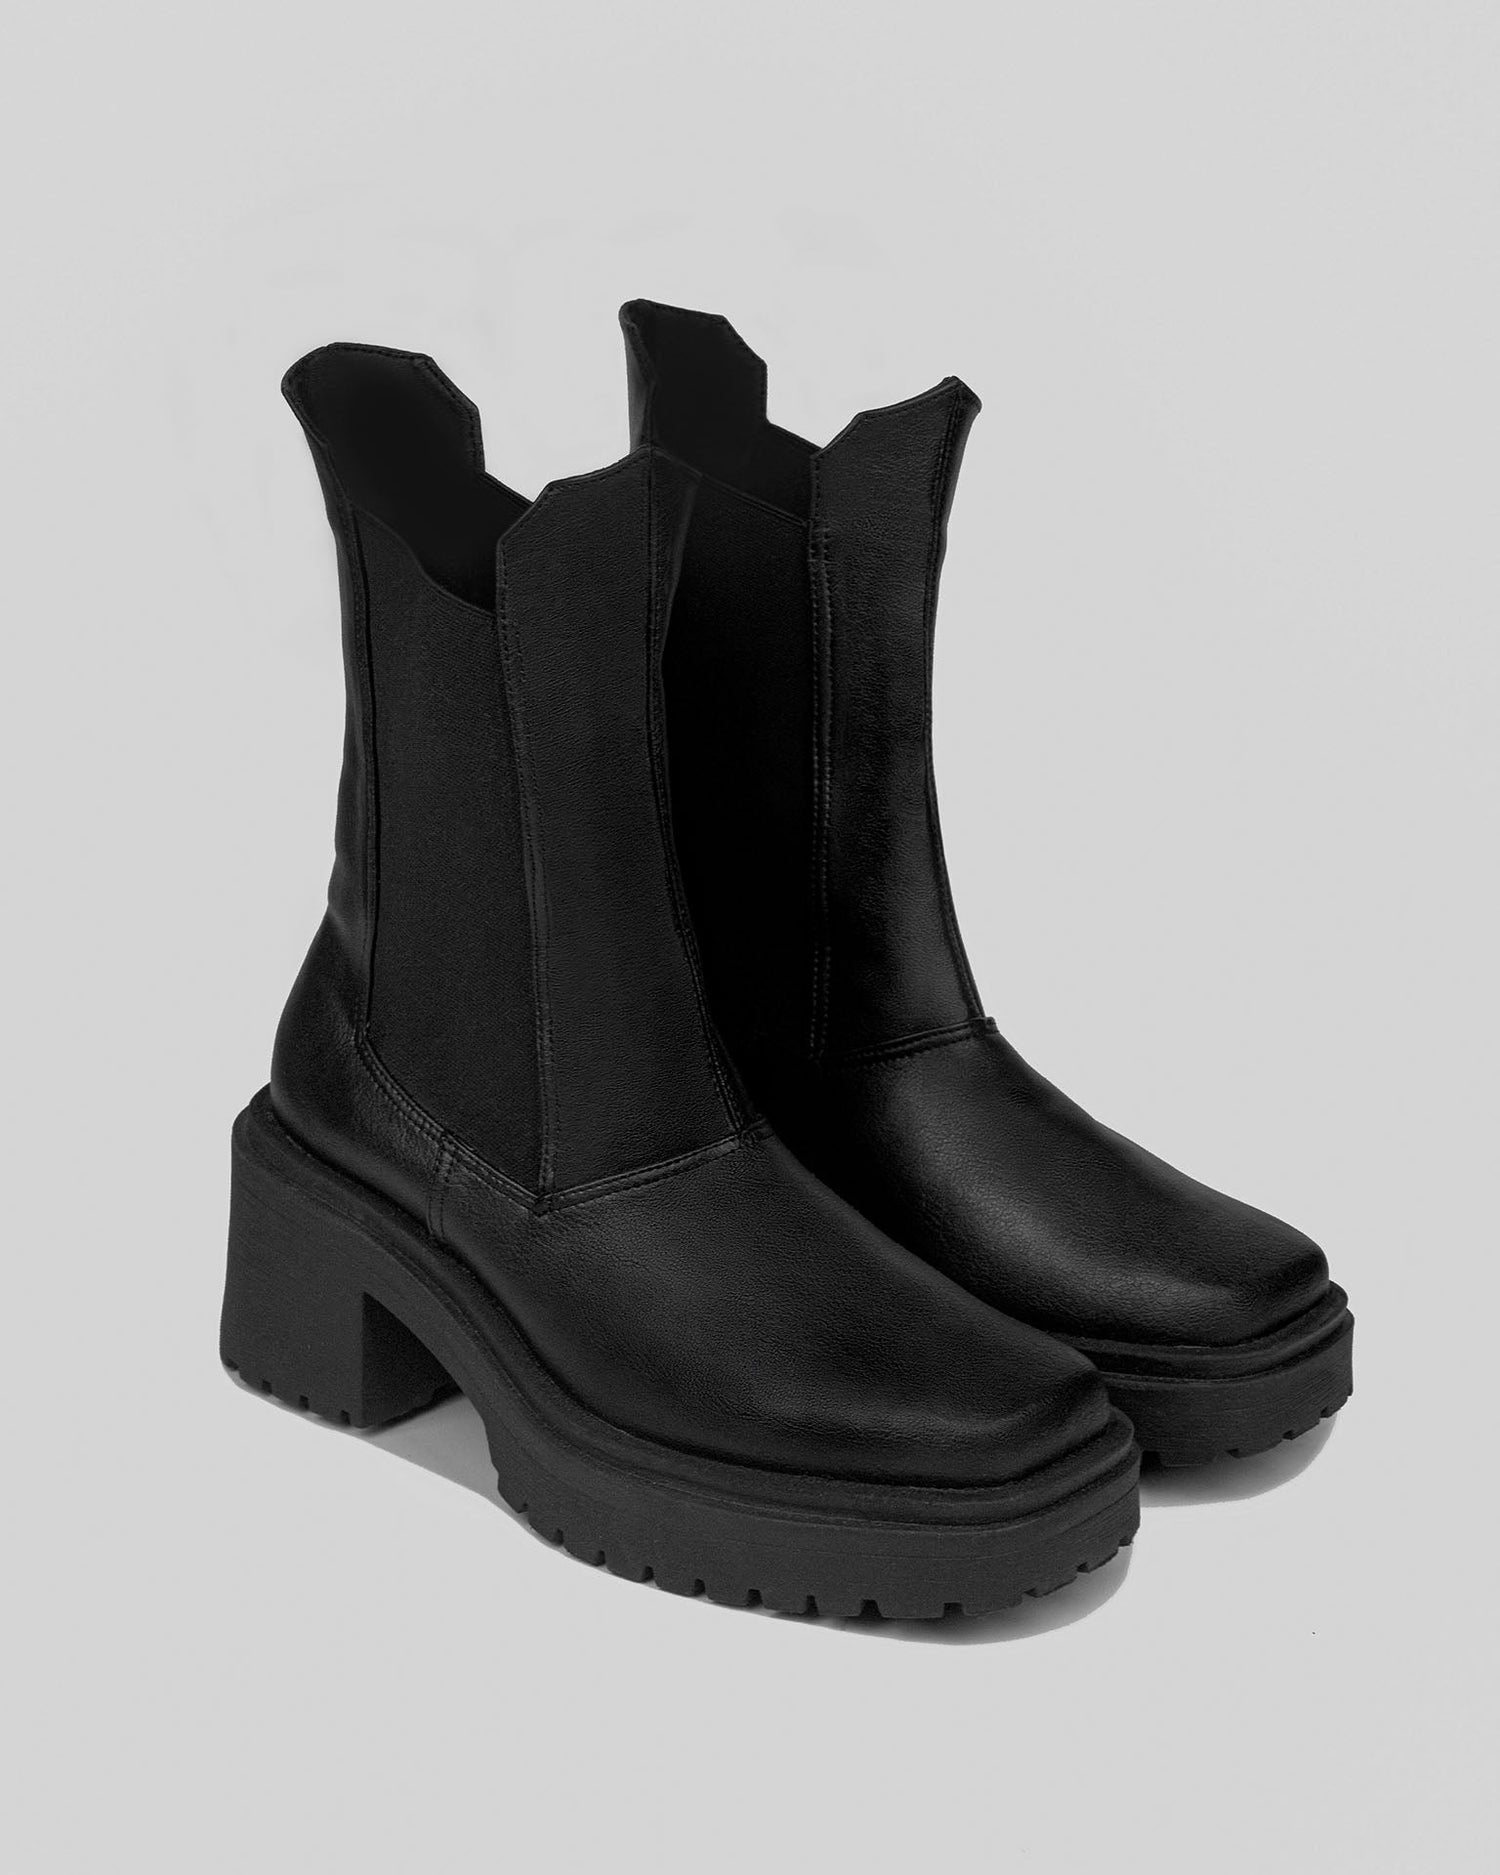 Squared Chelsea Boots Women’s Vegan Boots